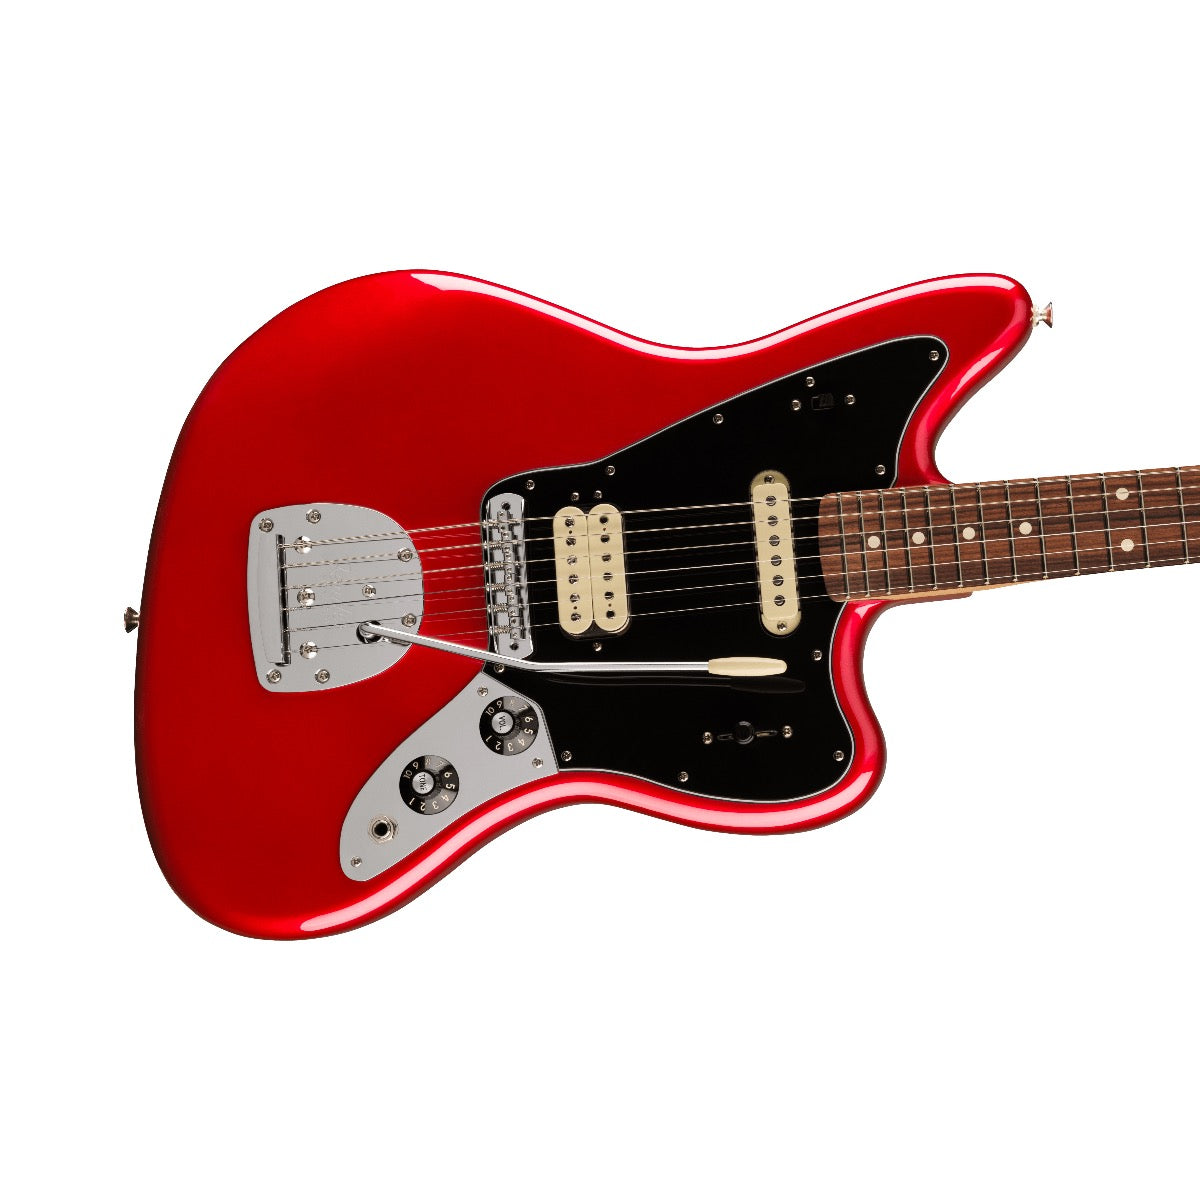 Fender Player Jaguar - Candy Apple Red, View 5